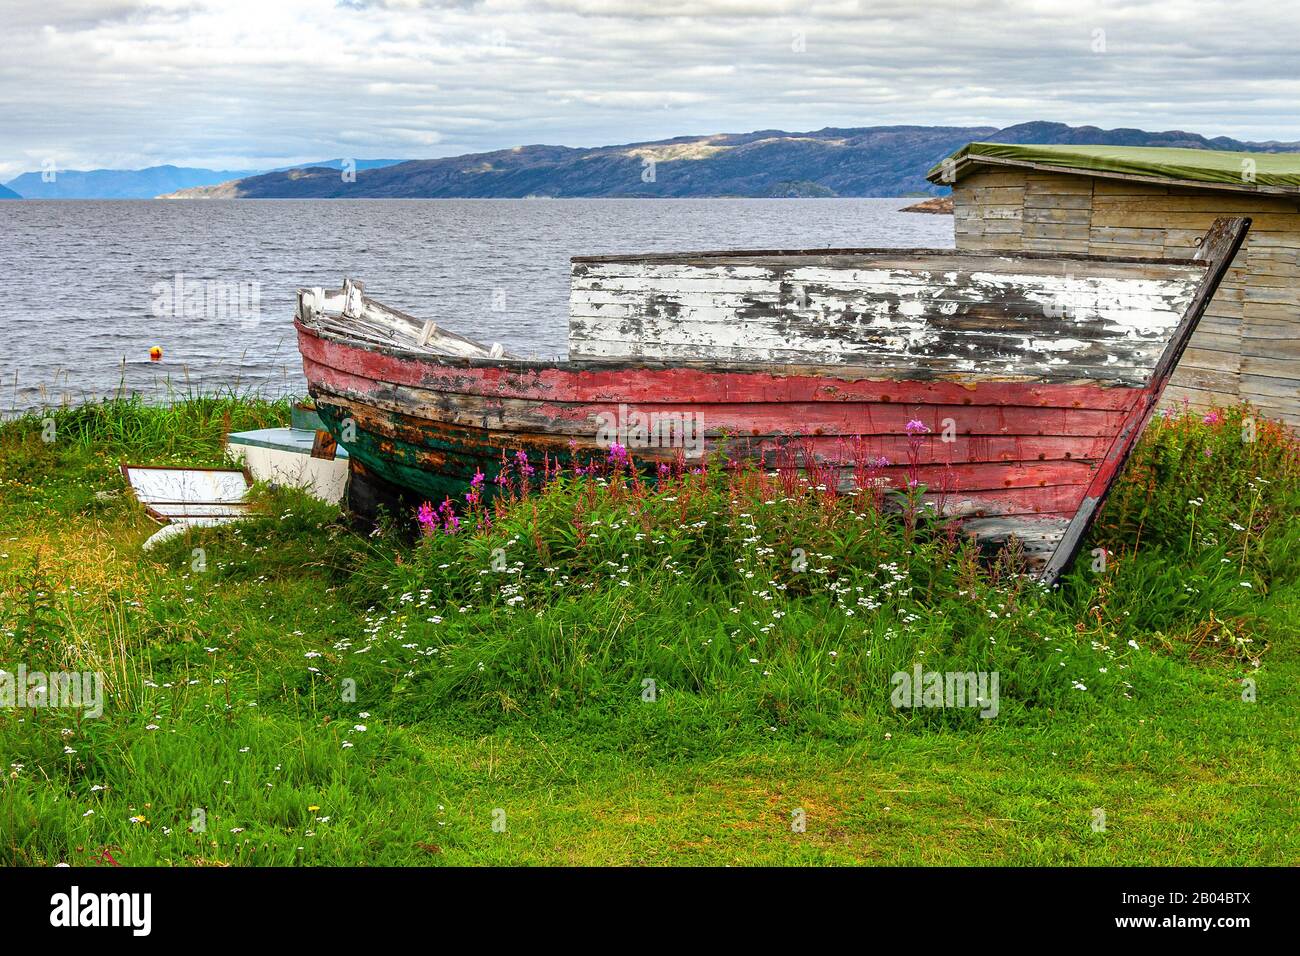 Old wooden boat abandoned artic sea Stock Photo